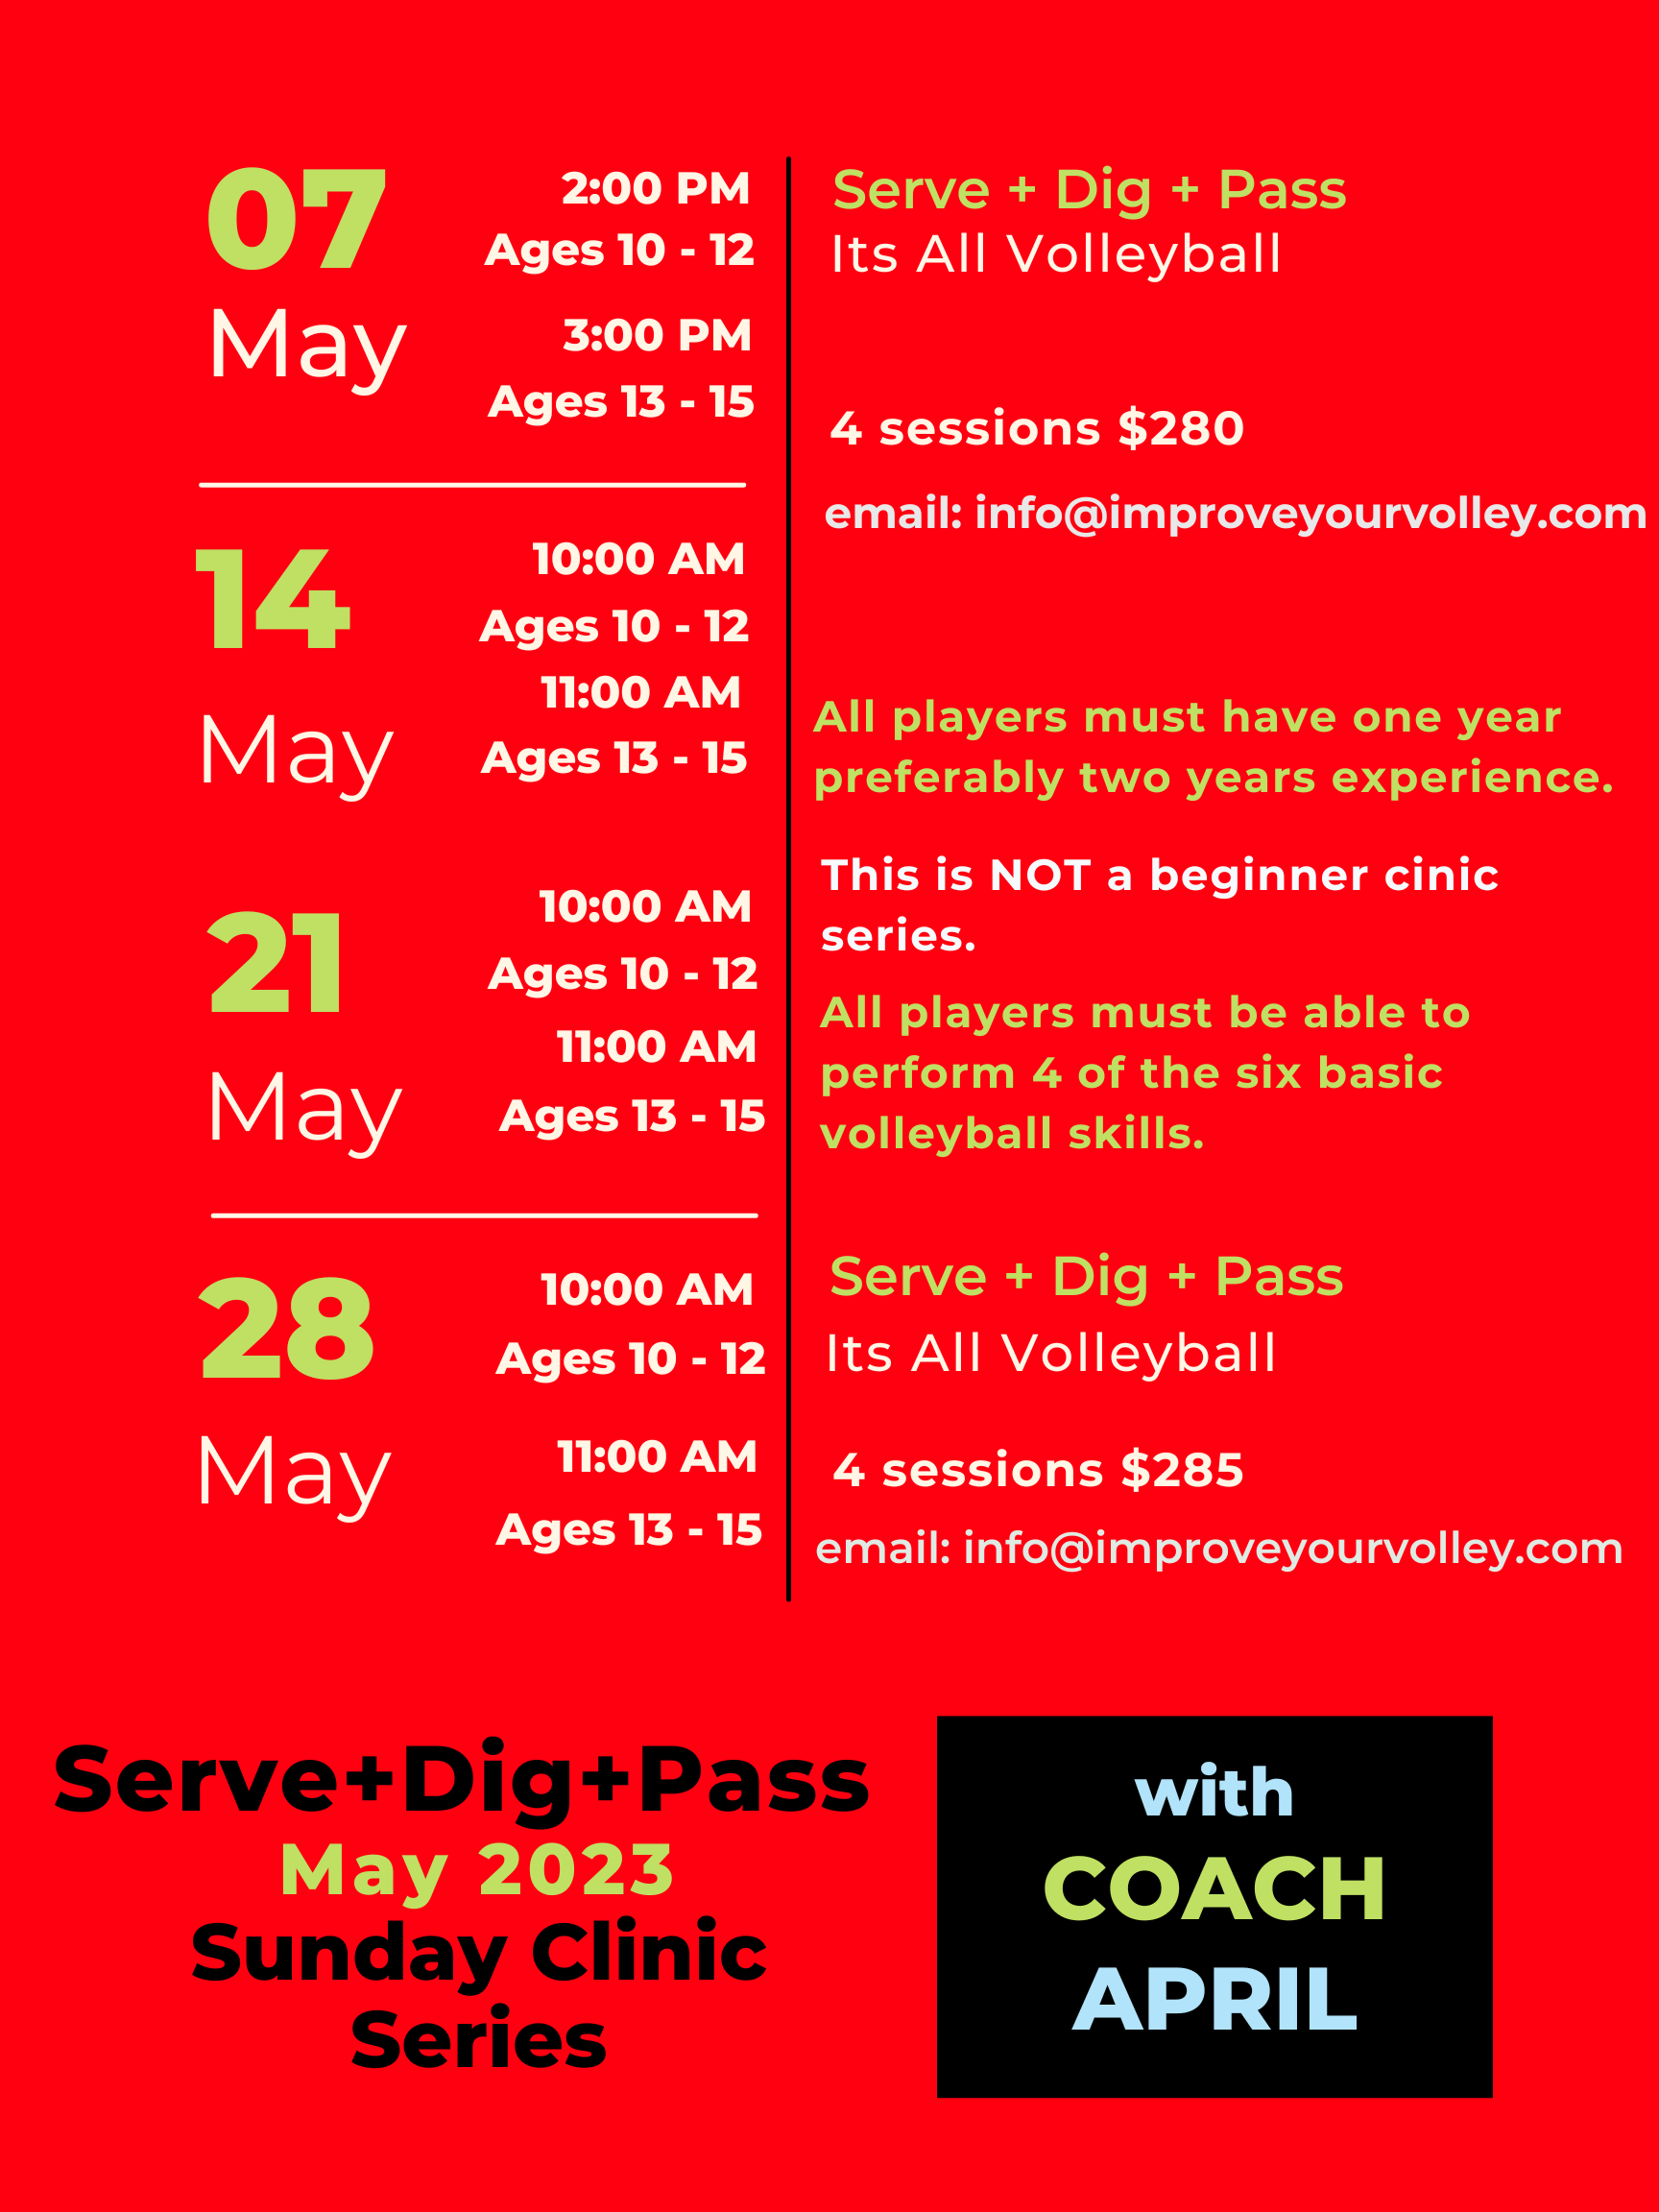 Registration is now open for May 2023 Serve+Dig+Pass+Clinics hosted by me, Coach April. 

For May there are Four two hour sessions on four Sundays in May from 10-11 for ages 10-12 and from 11 - 12 for ages 13 - 15. Must have 1-2 years of experience.  Limited spaces available. Spots will sell out. Email info@improveyourolley.com for more information.